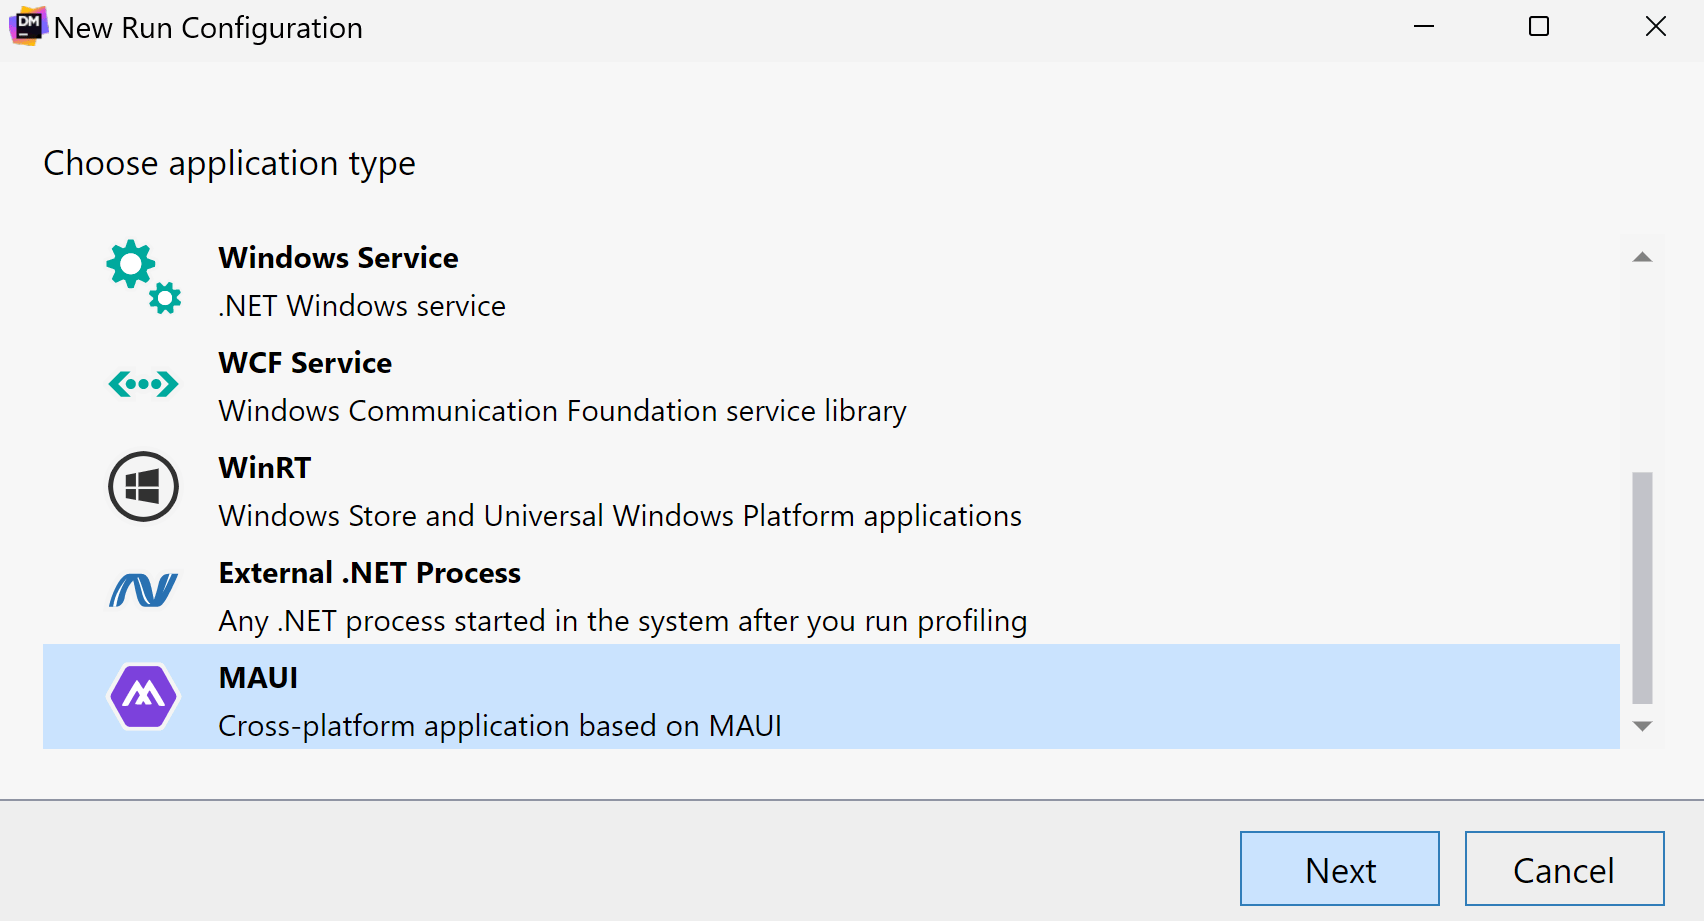 Support for MAUI applications